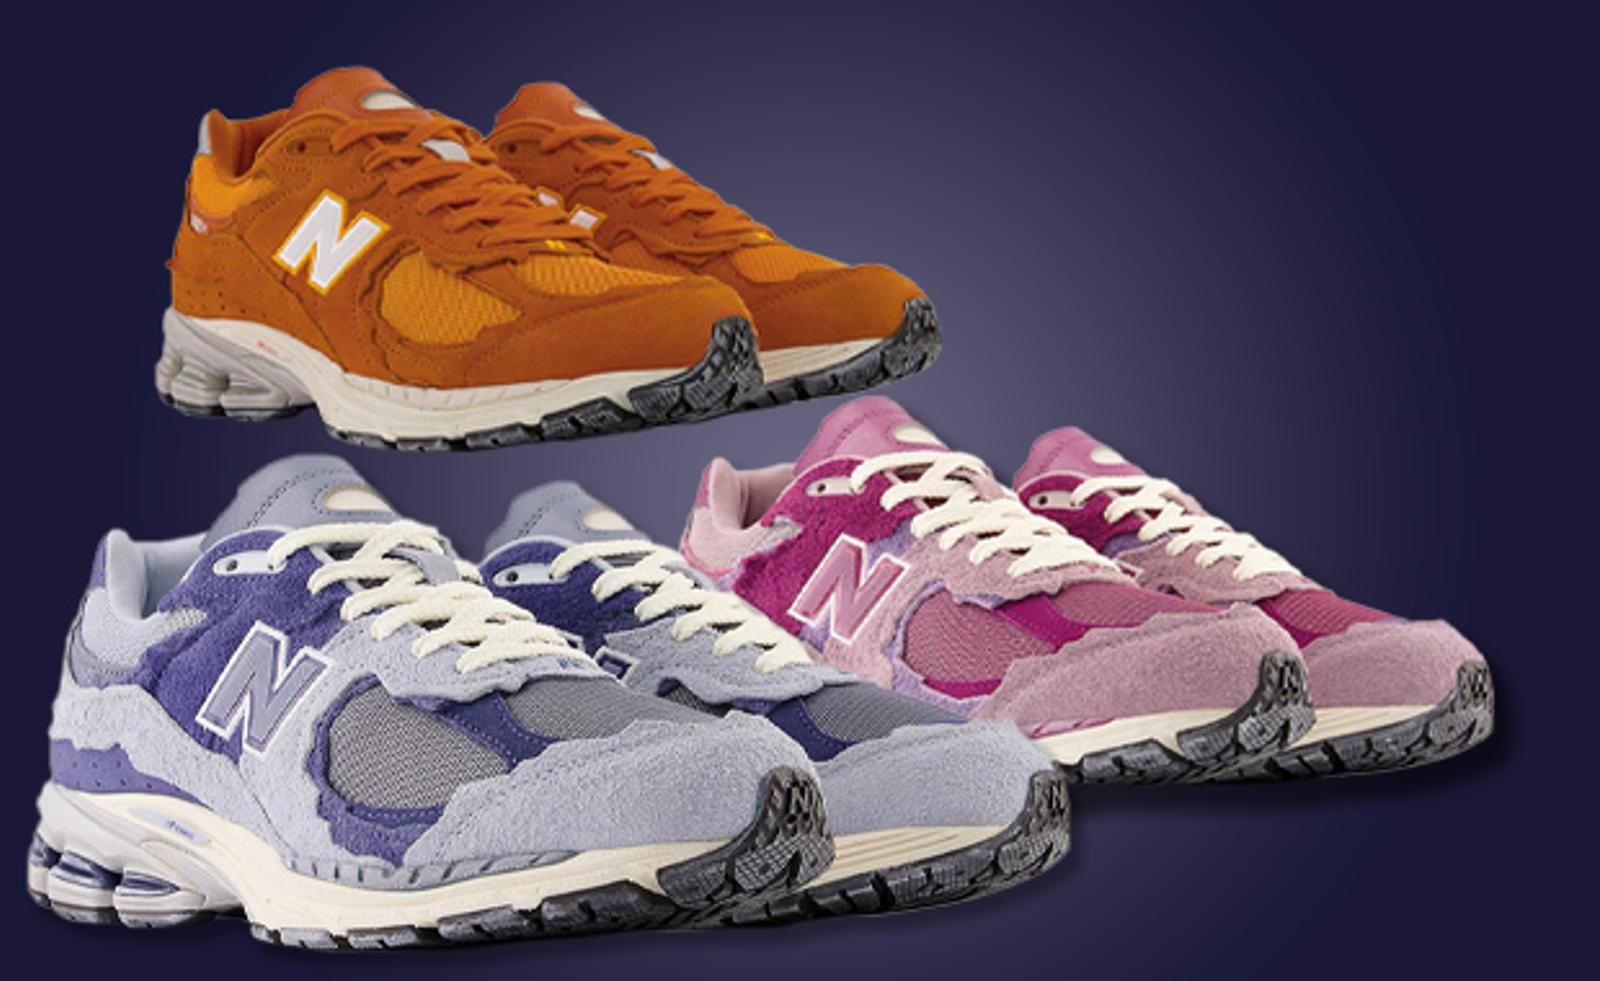 Three More New Balance 2002R Protection Pack Colorways Are On The Horizon